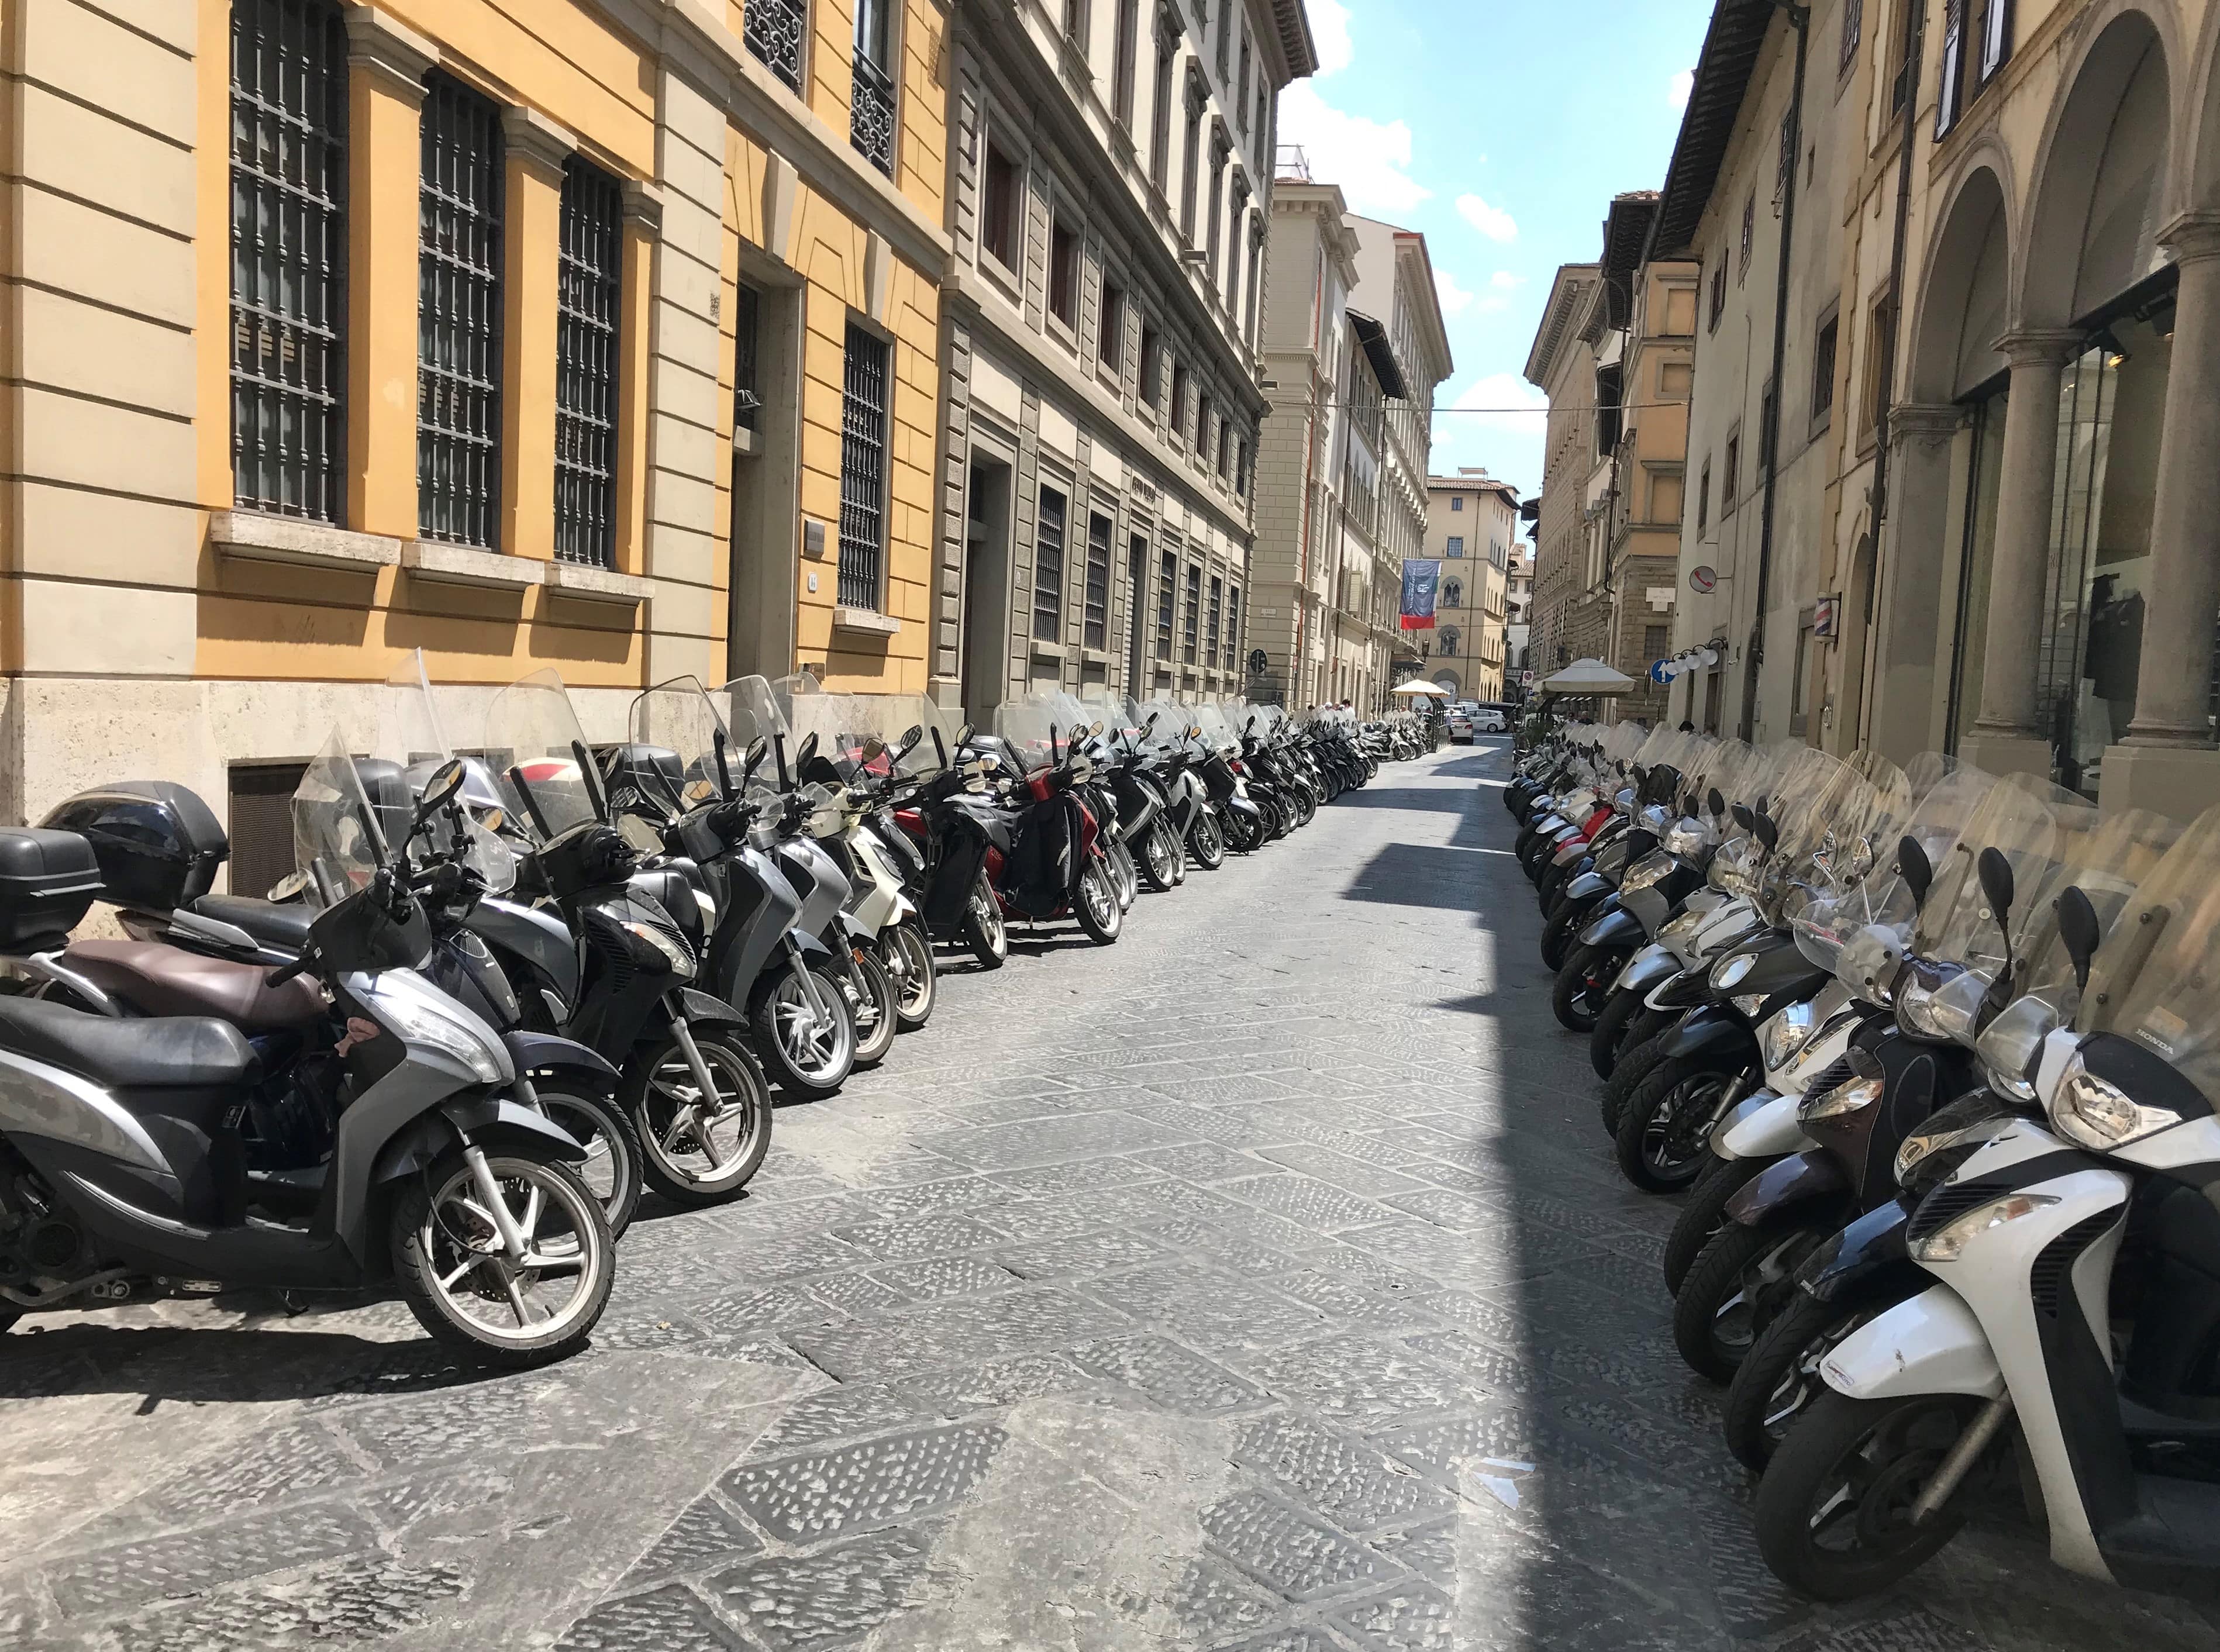 A true story from my trip to Florence.